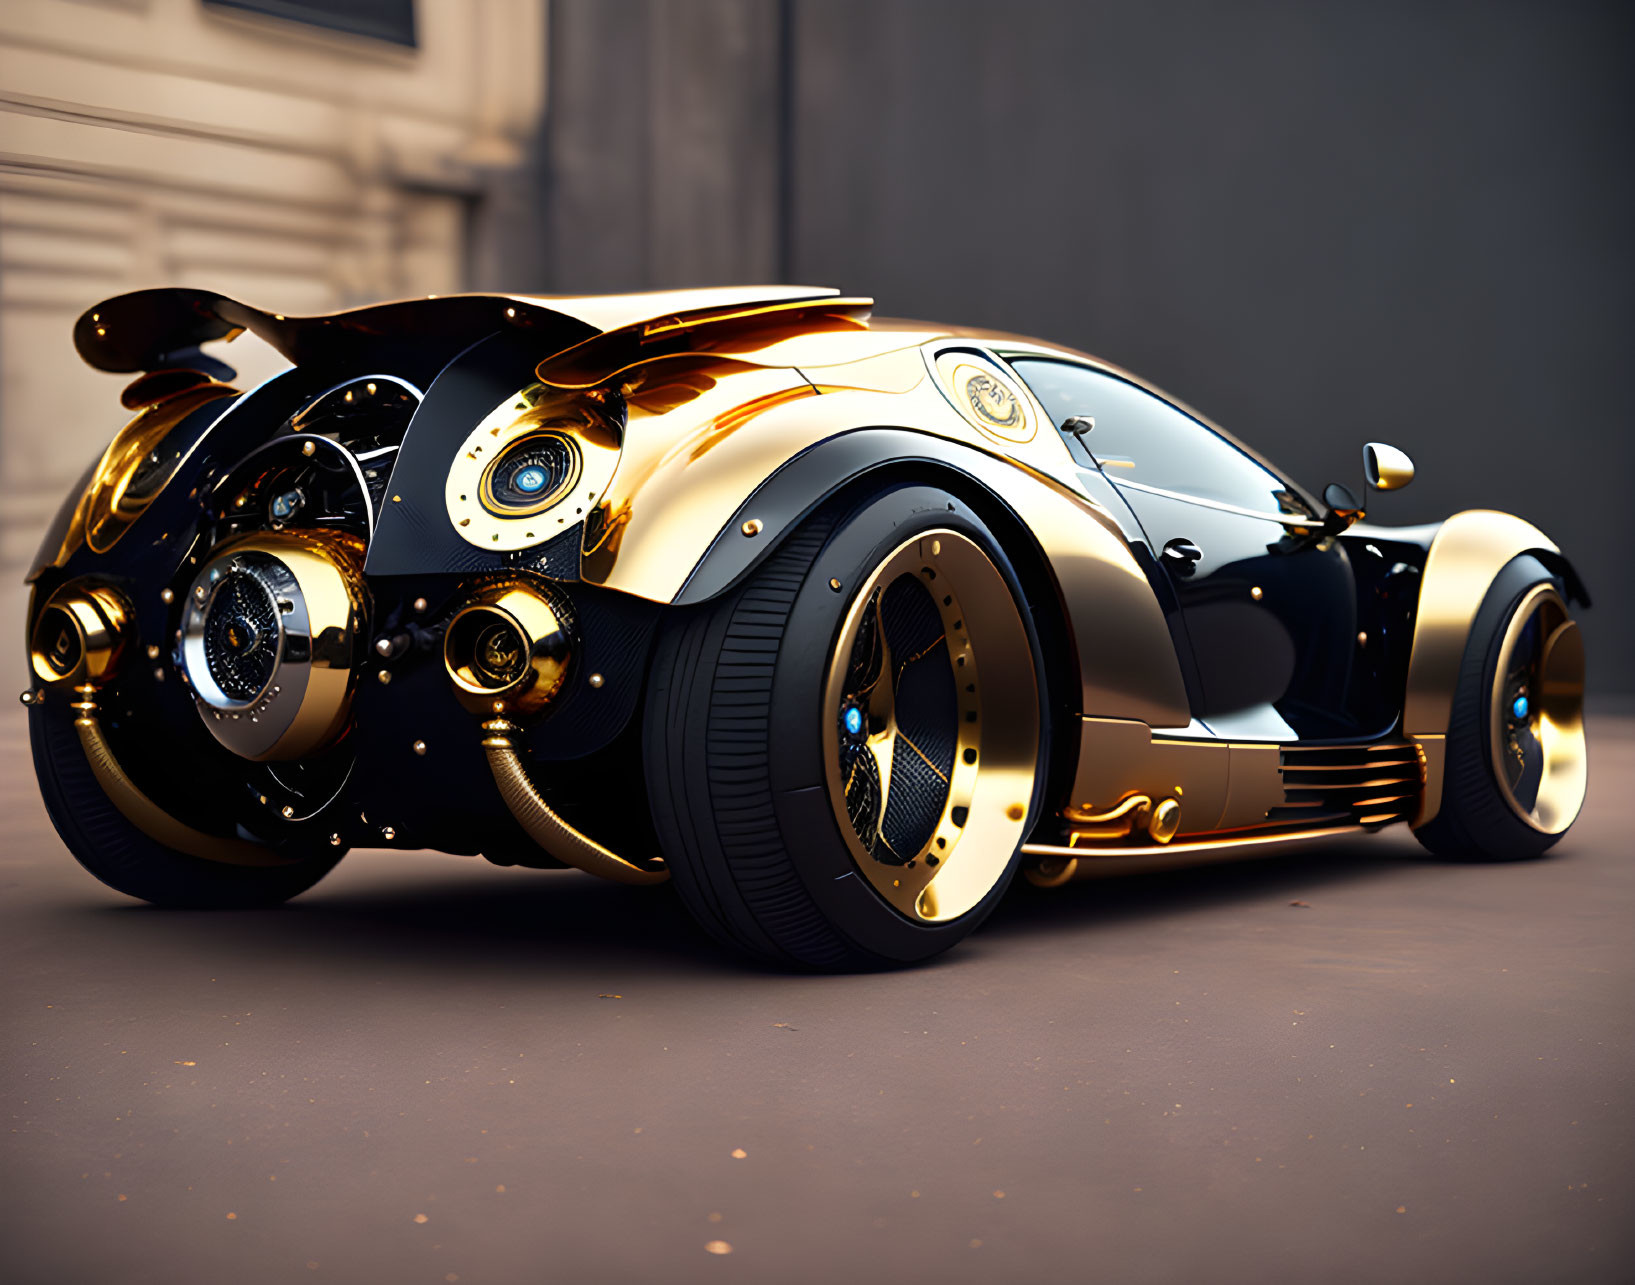 Luxurious Futuristic Motorcycle with Black and Gold Design